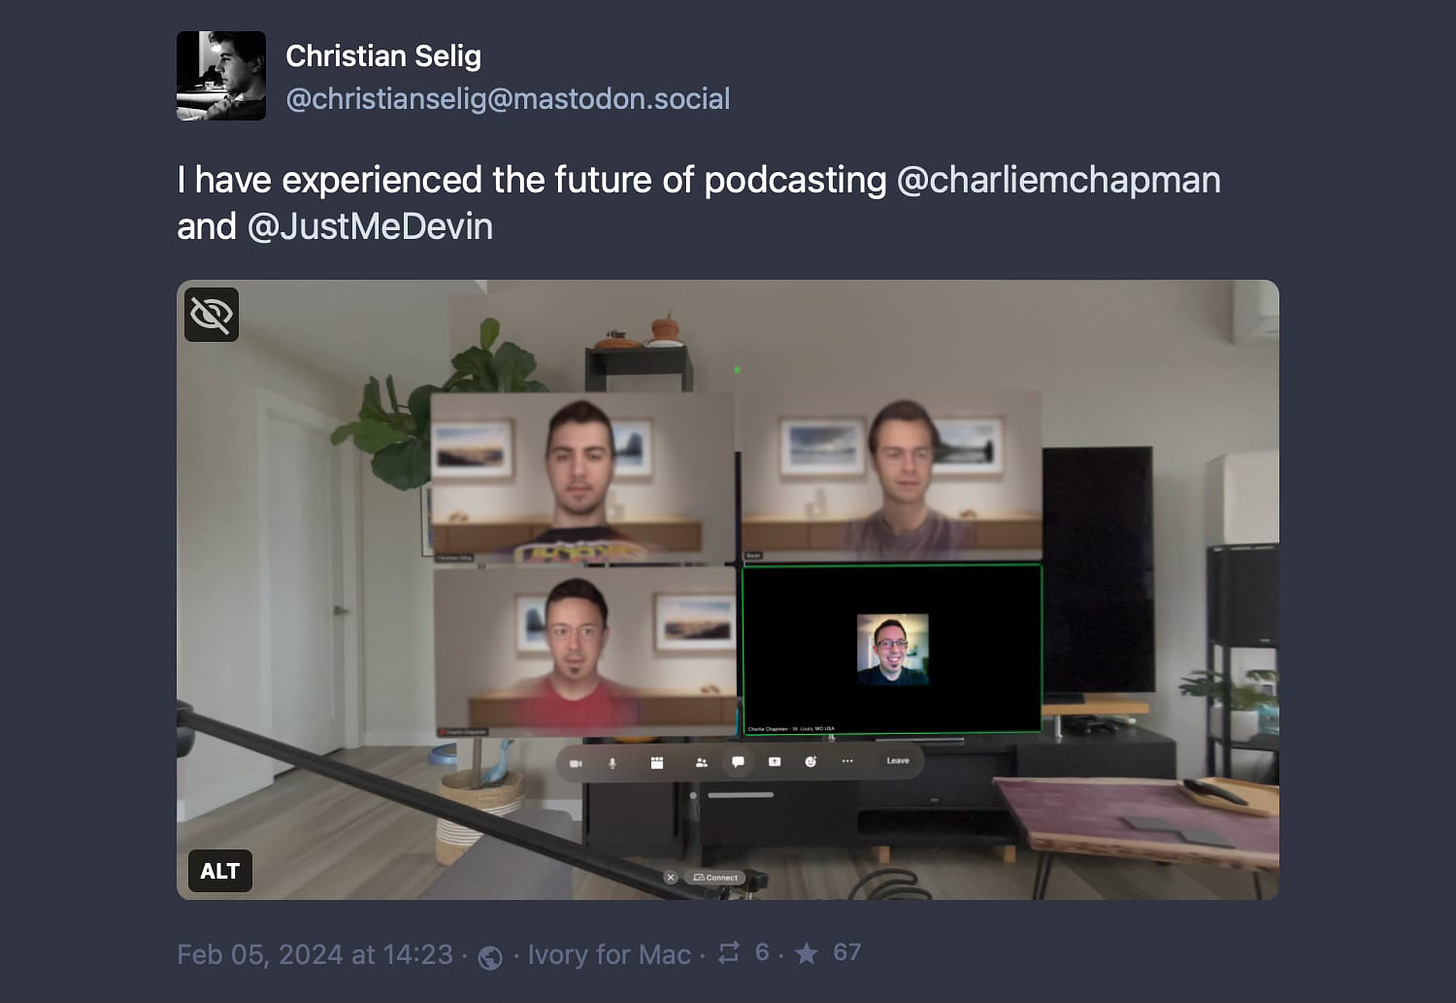 A screenshot of a Mastodon post showing Persona video conferencing on Apple Vision Pro.